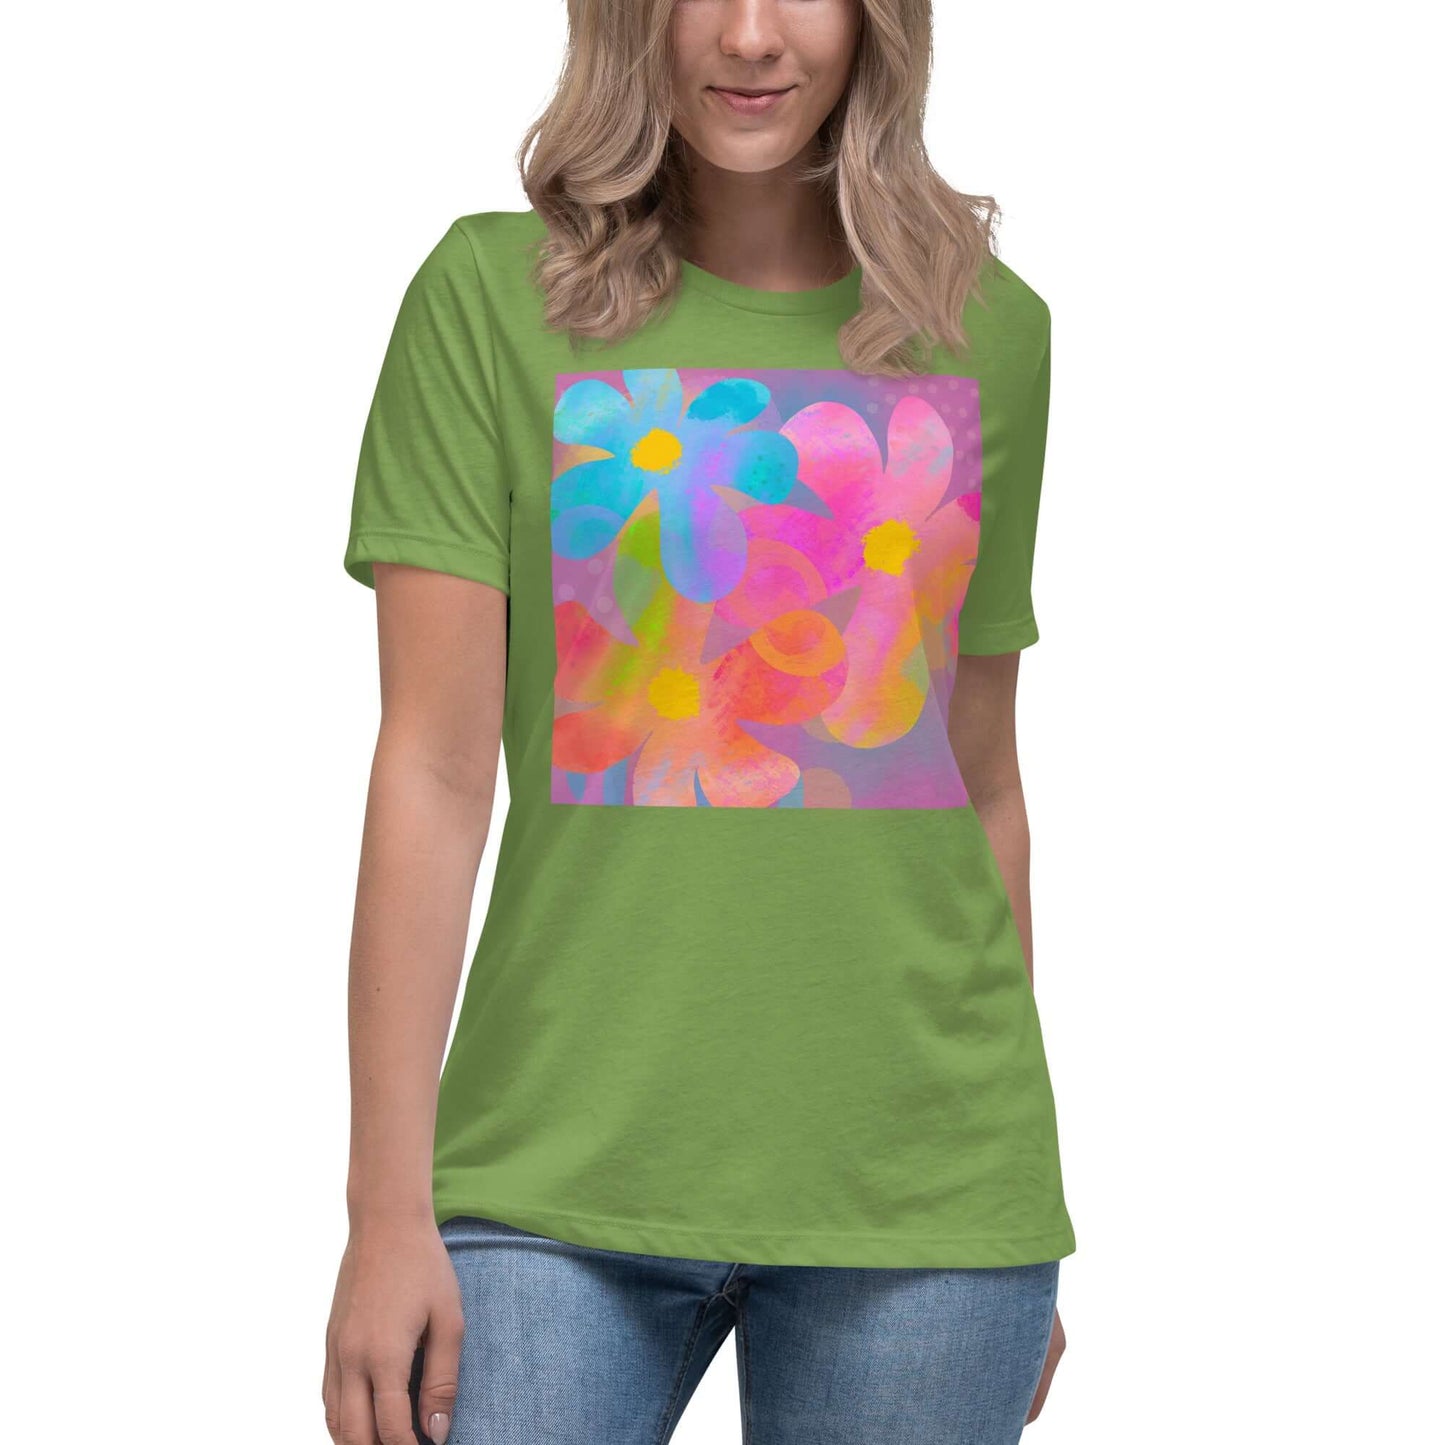 Big Colorful 1960s Psychedelic “Hippie Flowers” Women’s Short Sleeve Tee in Leaf Green